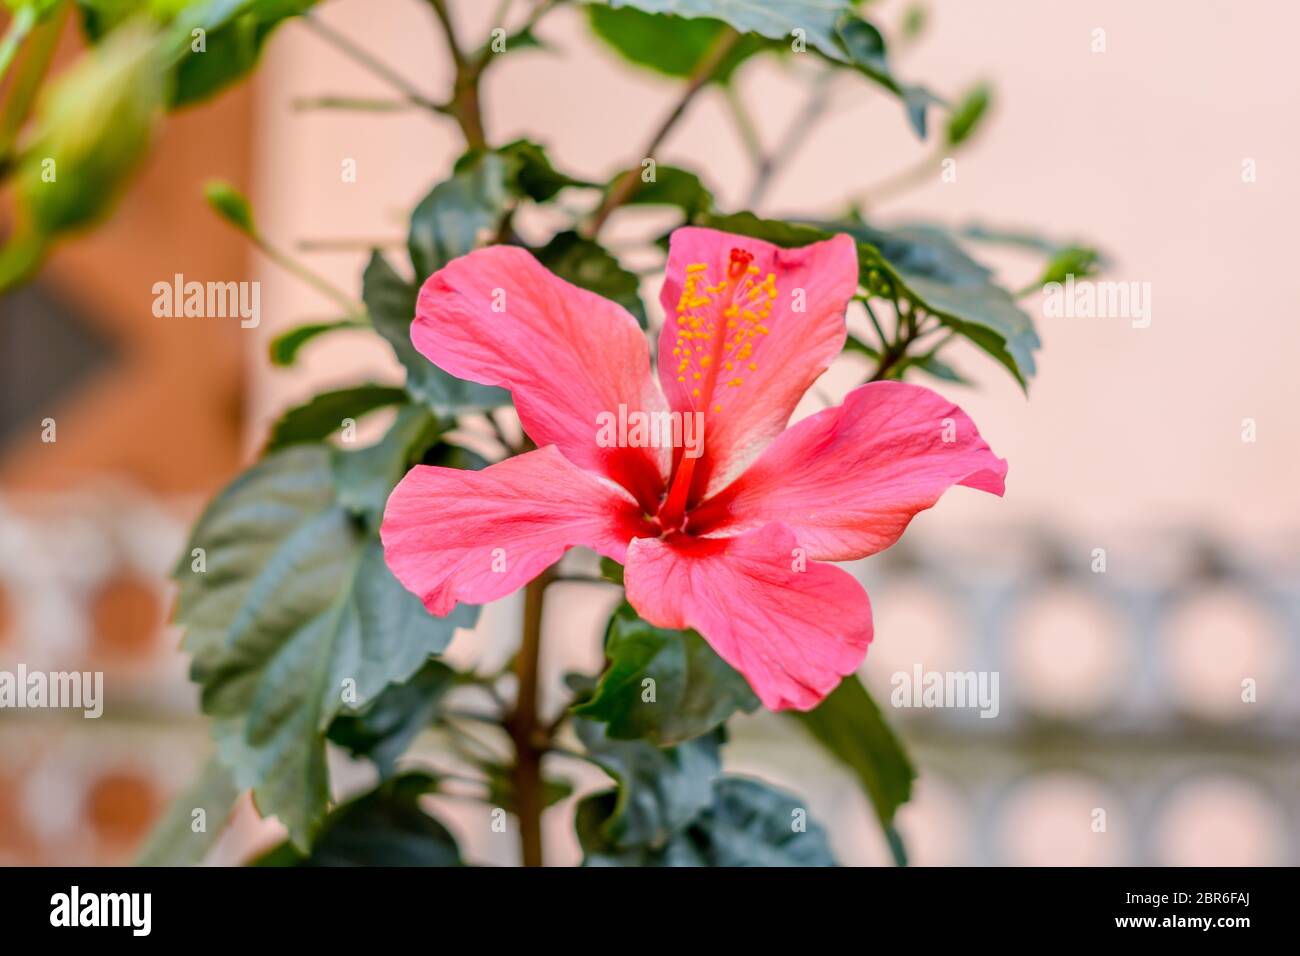 One Chaba flower (Hibiscus rosa-sinensis) chinese rose, red color, on upward direction, blooming in morning sunlight in isolated background. Vintage f Stock Photo